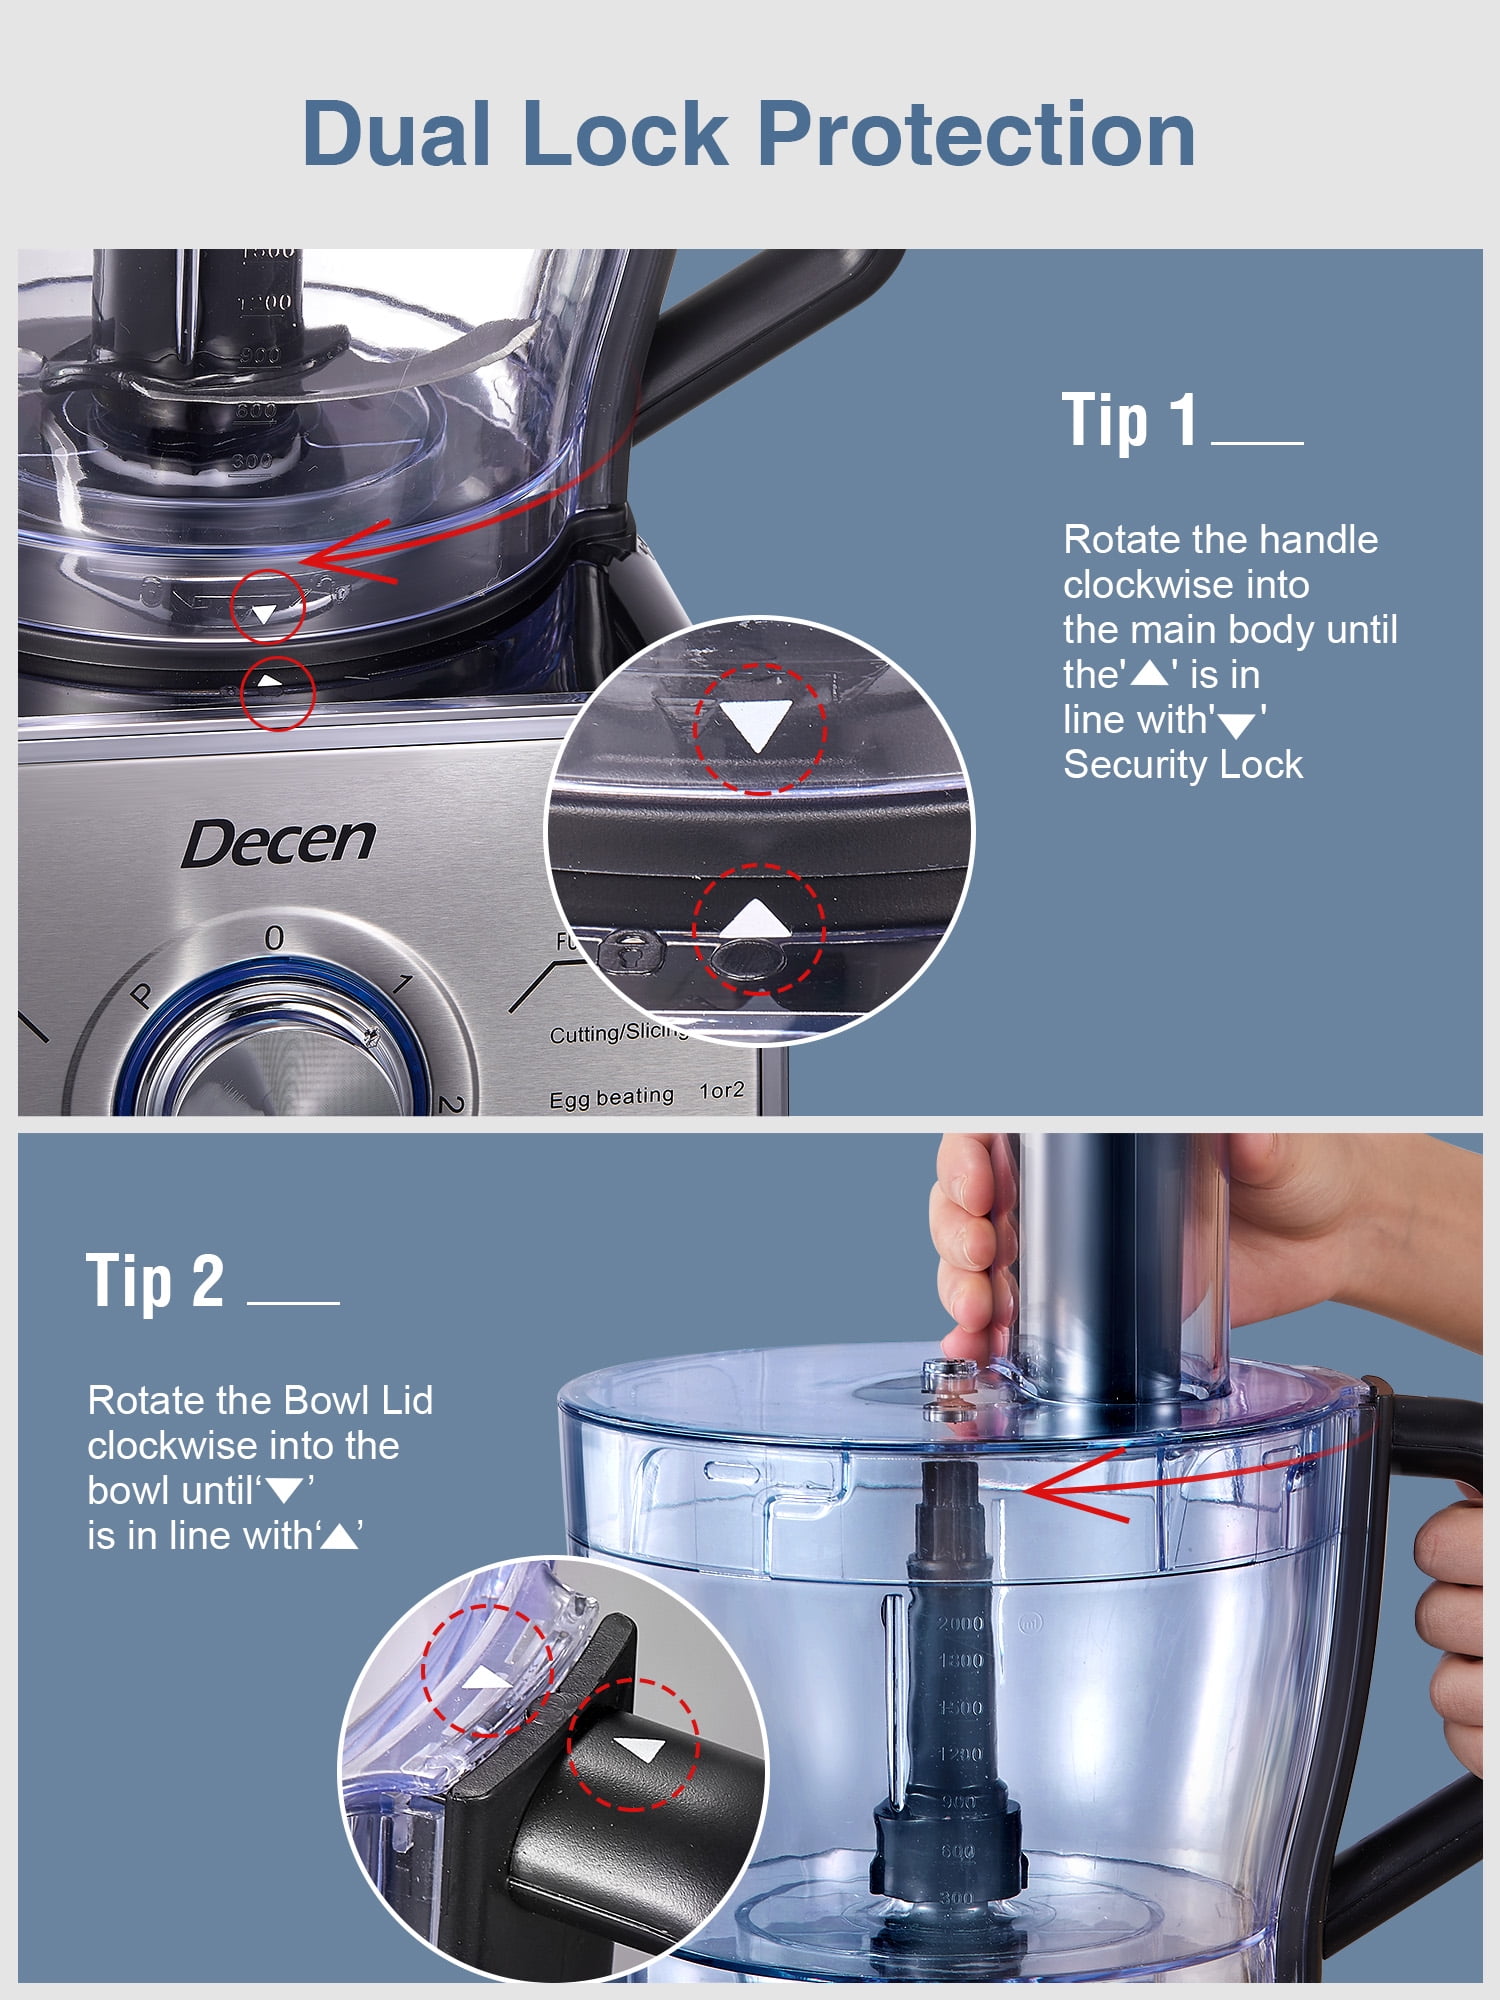 Check out my new favorite kitchen heller… the cup slicer! Save time 